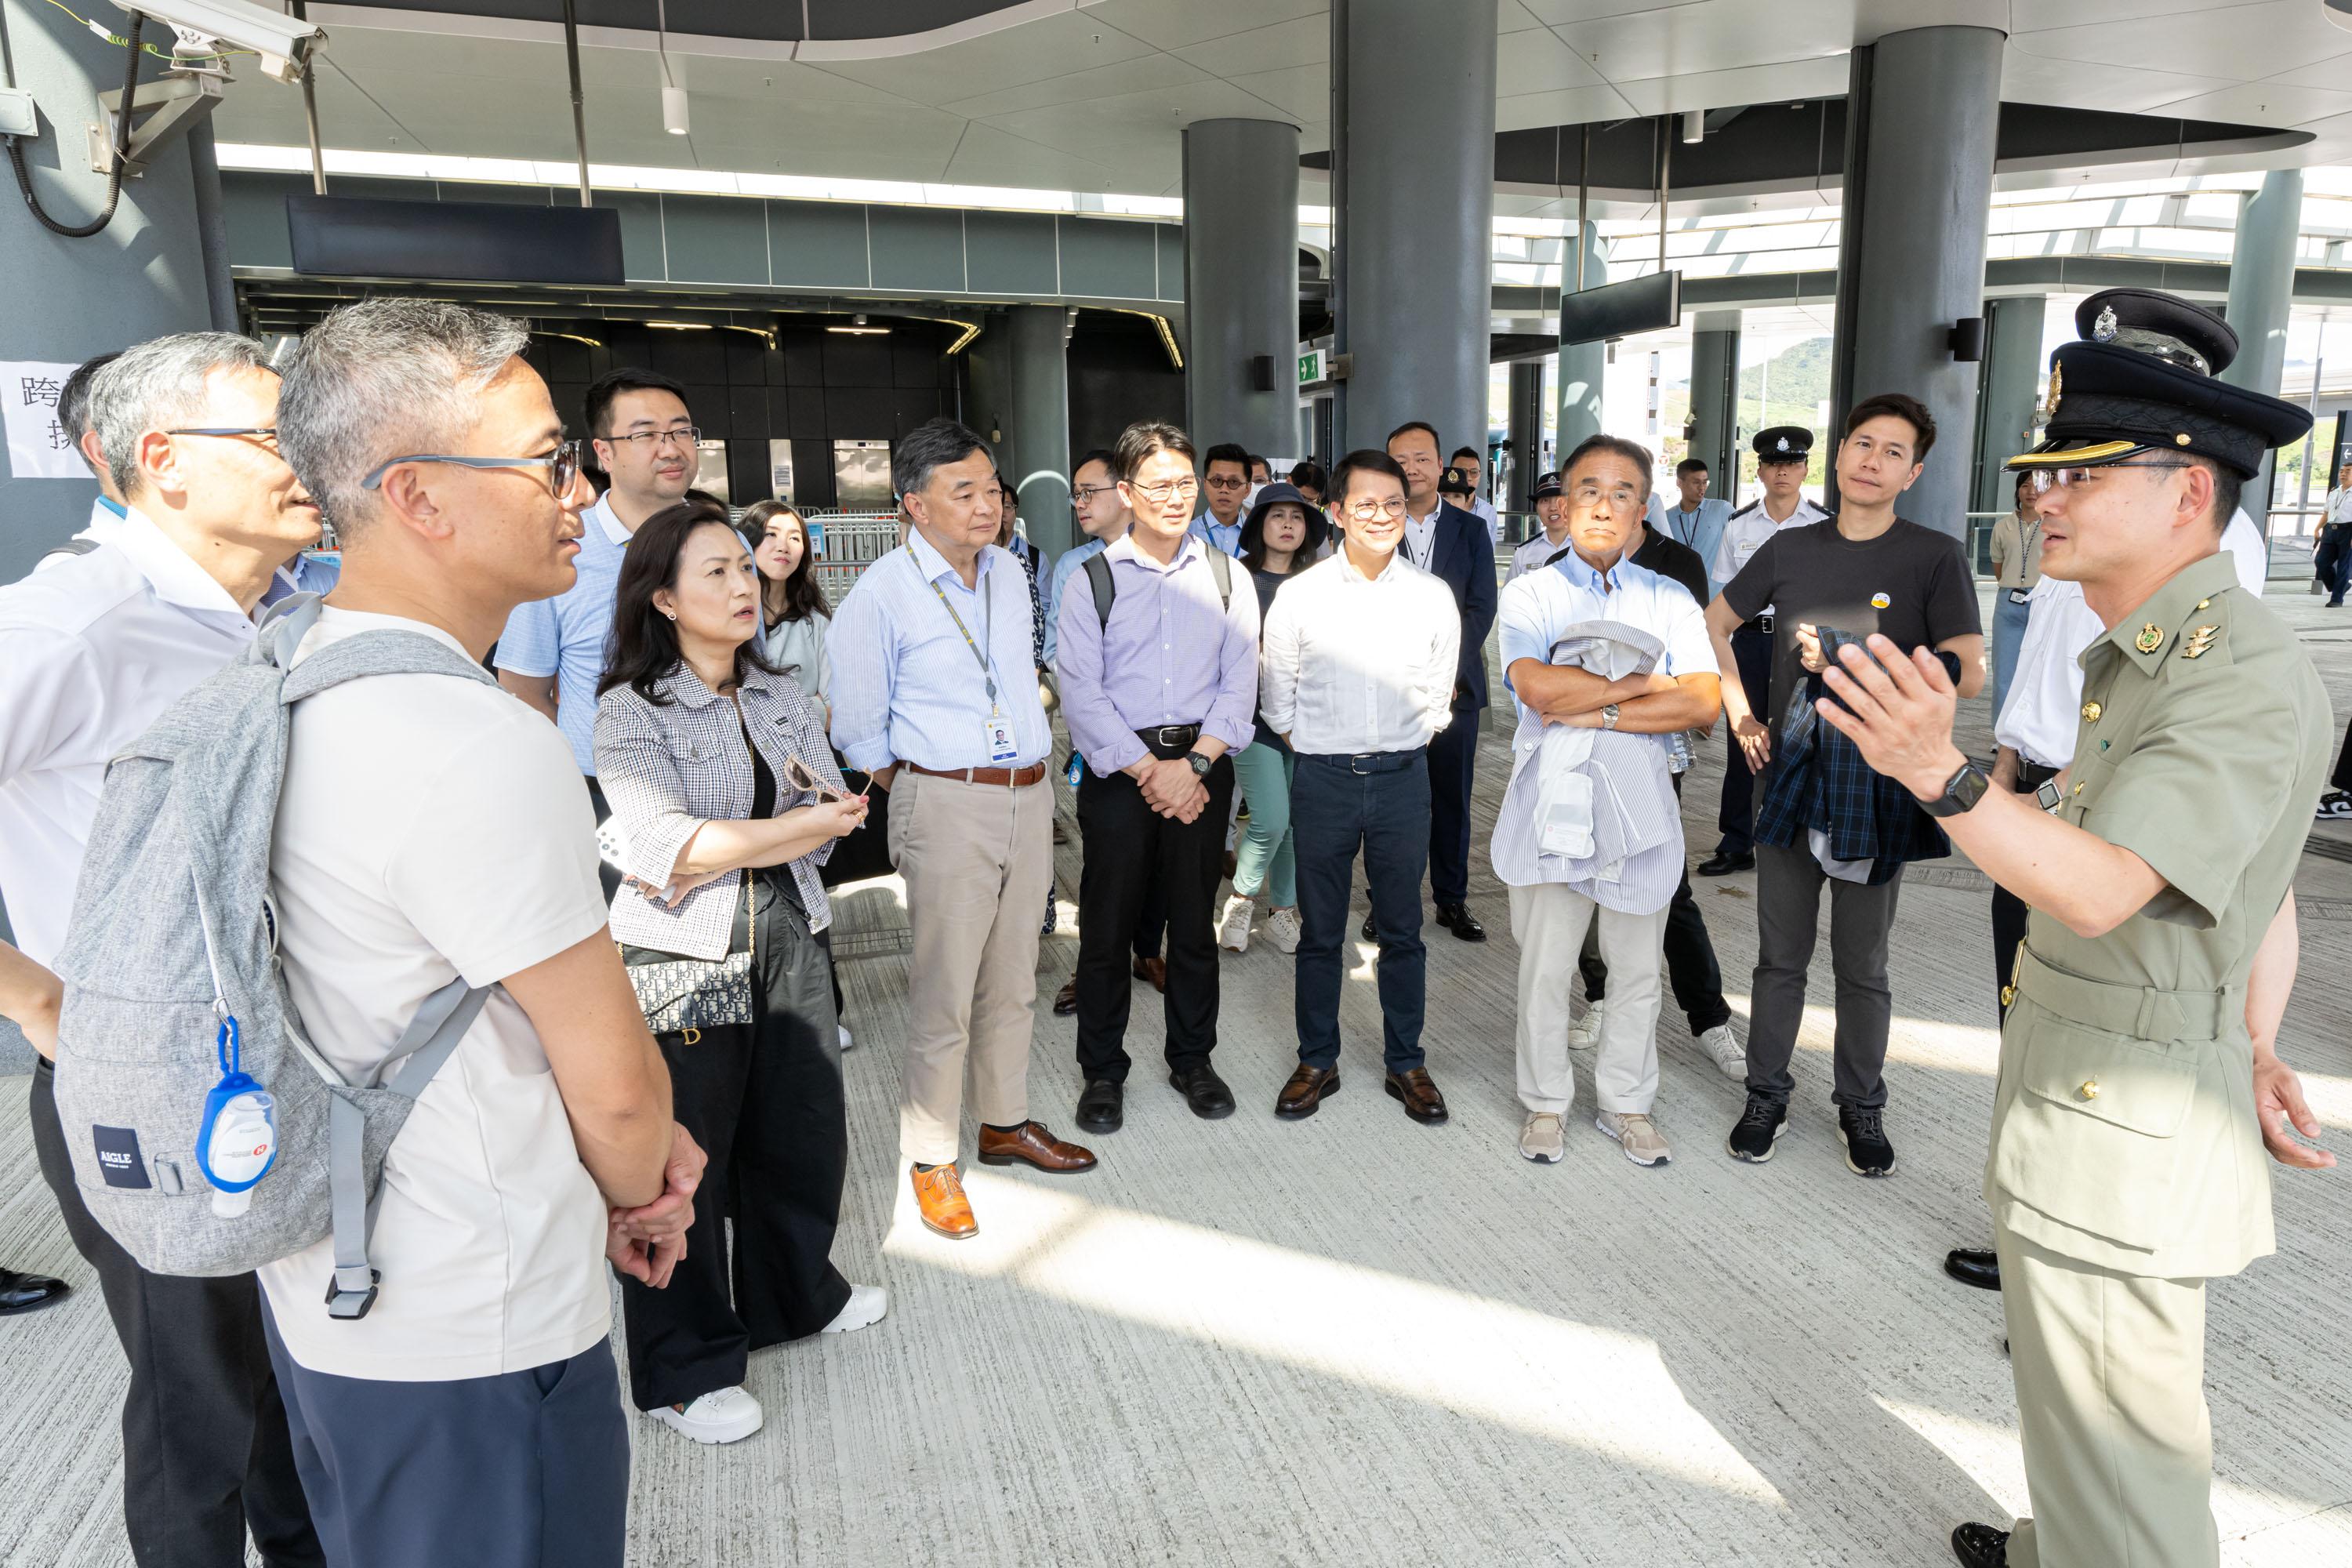 The Legislative Council (LegCo) Panel on Security visits Sha Tau Kok and Liantang/Heung Yuen Wai Boundary Control Point today (July 11). Photo shows LegCo Members observing the clearance arrangement for private cars at designated kiosks in the Liantang/Heung Yuen Wai Boundary Control Point.